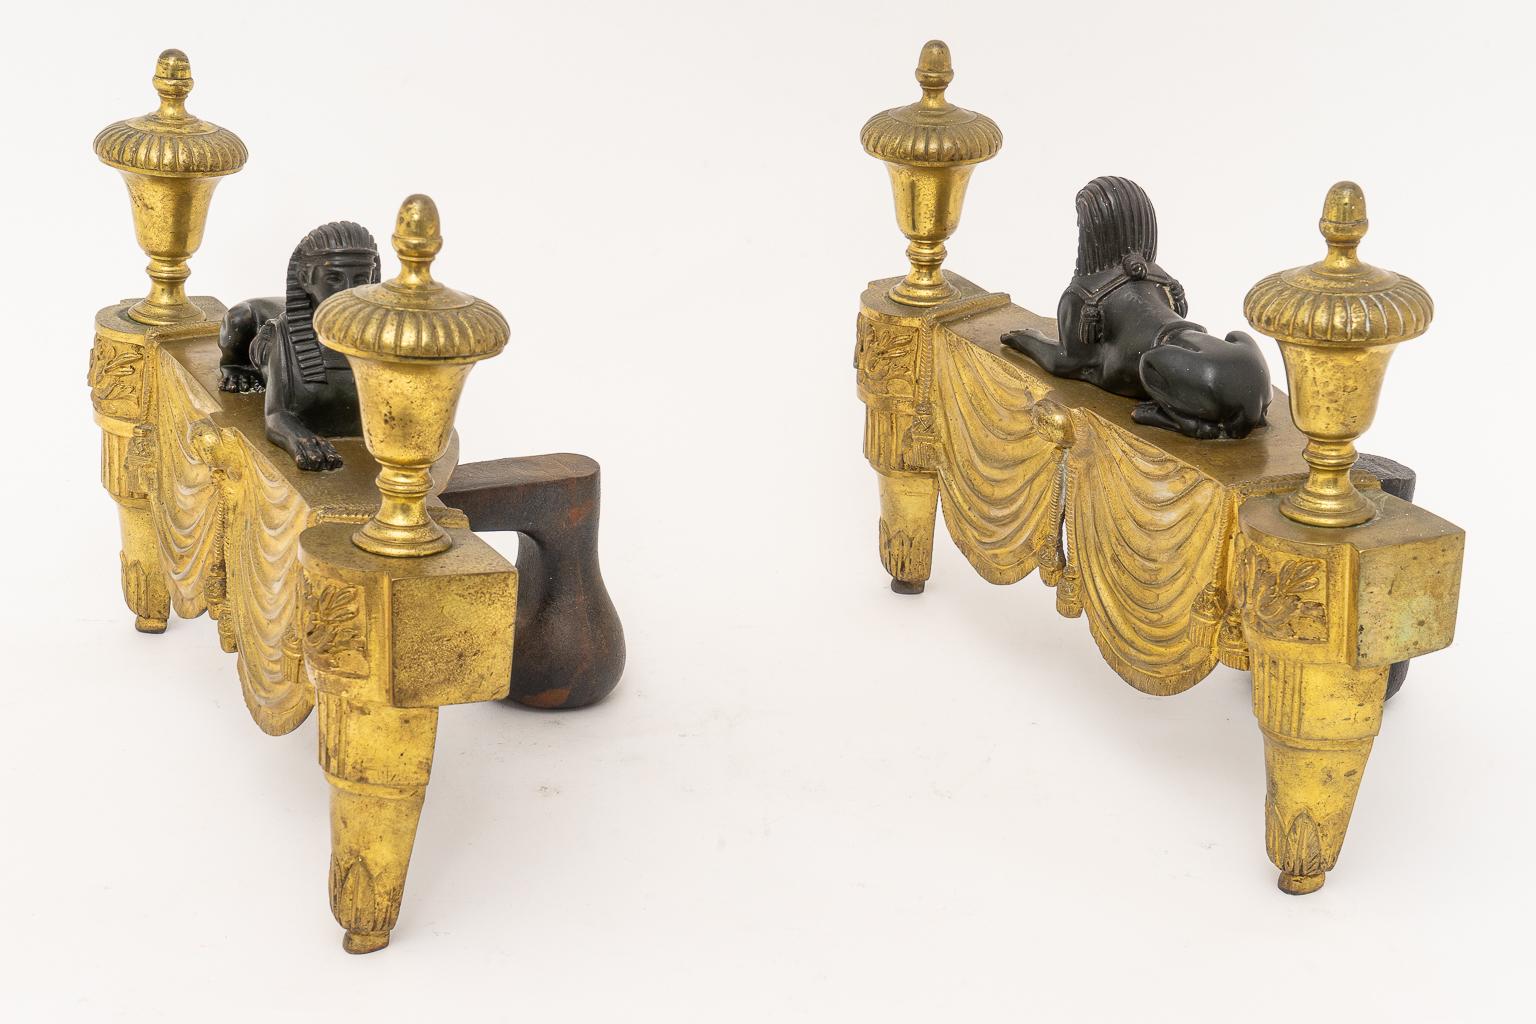 This stylish set of French, Egyptian Revival chenets were acquired from a Palm Beach estate. The pieces are fabricated in gilt bronze and patinated bronze. The dark sphinx contrast handsomely against the gilt bronze base that is detailed with swaged